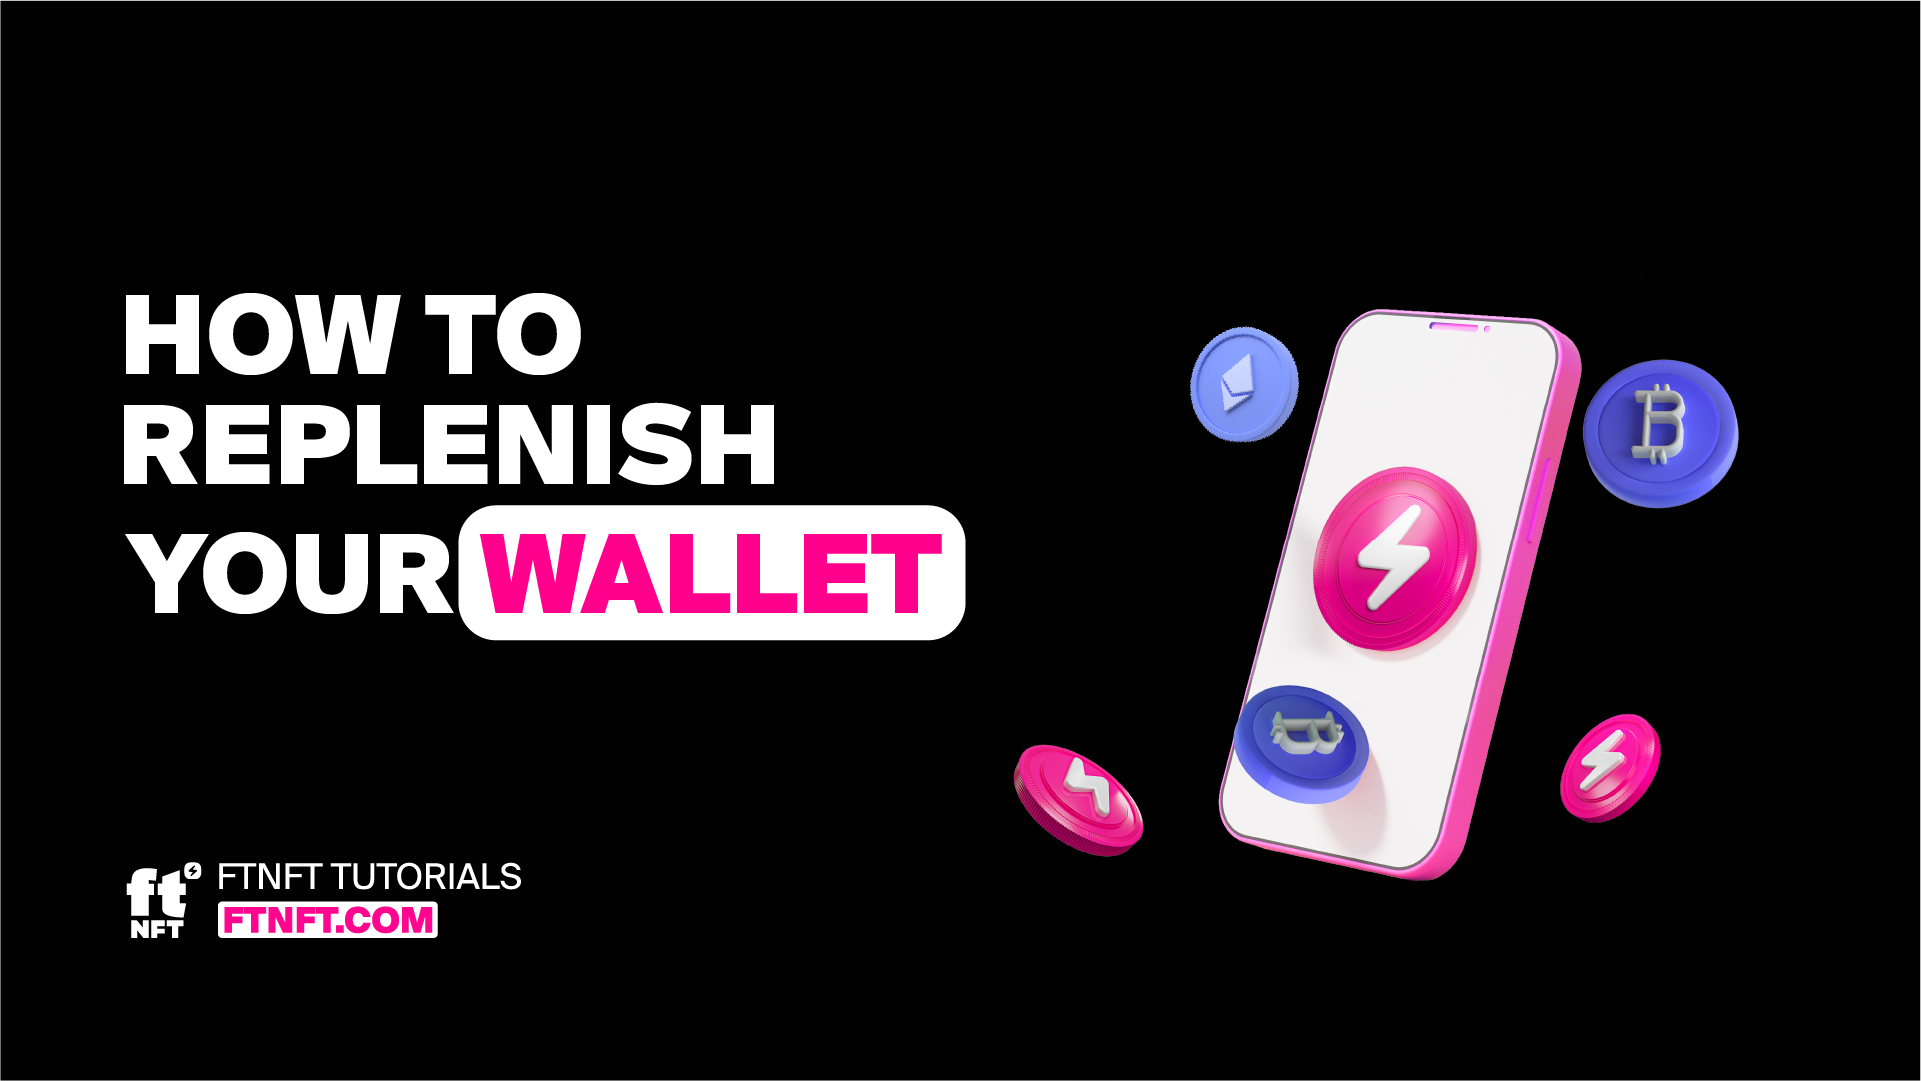 2134-how-to-replenish-your-wallet-16910544467365.png